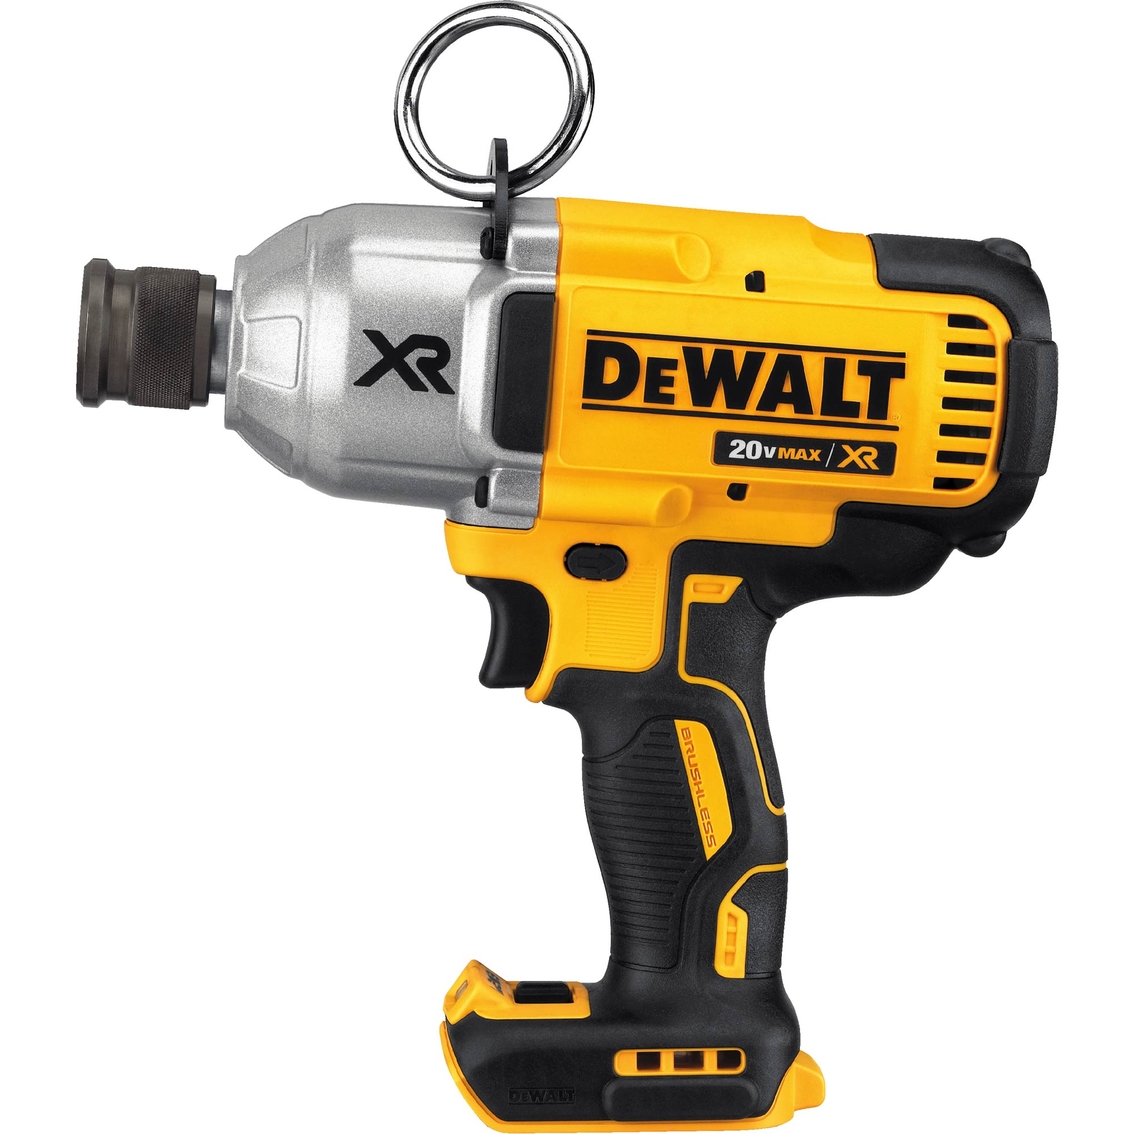 DeWalt 20V MAX* XR Brushless 7/16 in. Impact Wrench with Quick Release Chuck (Bare) - Image 2 of 2